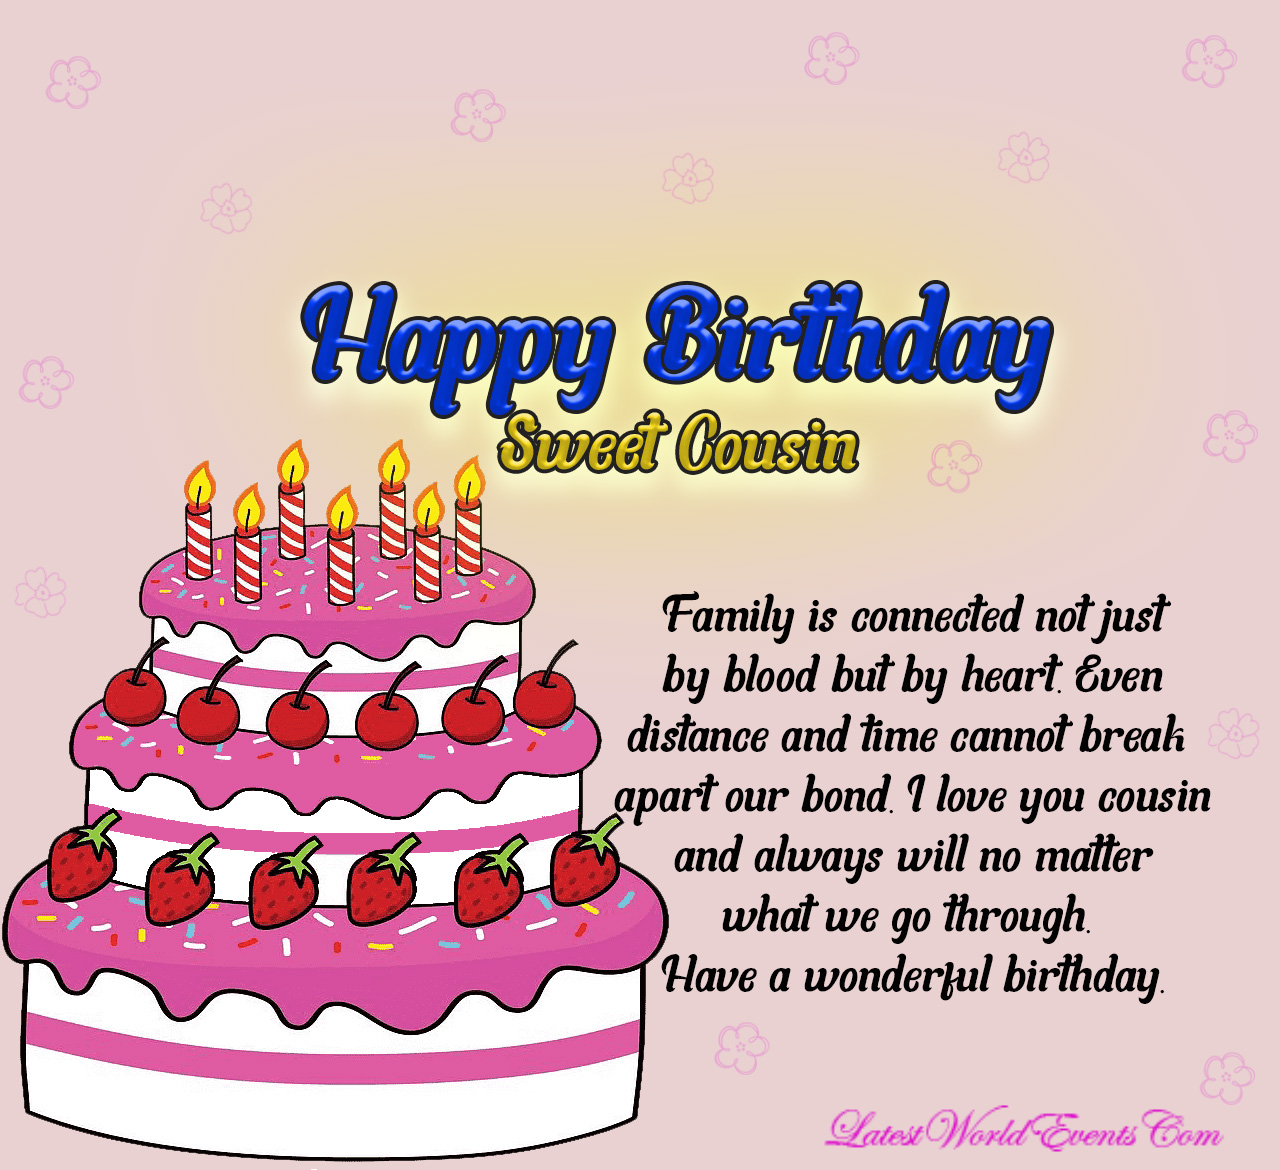 Awesome-happy-birthday-cousin-quotes-and-images